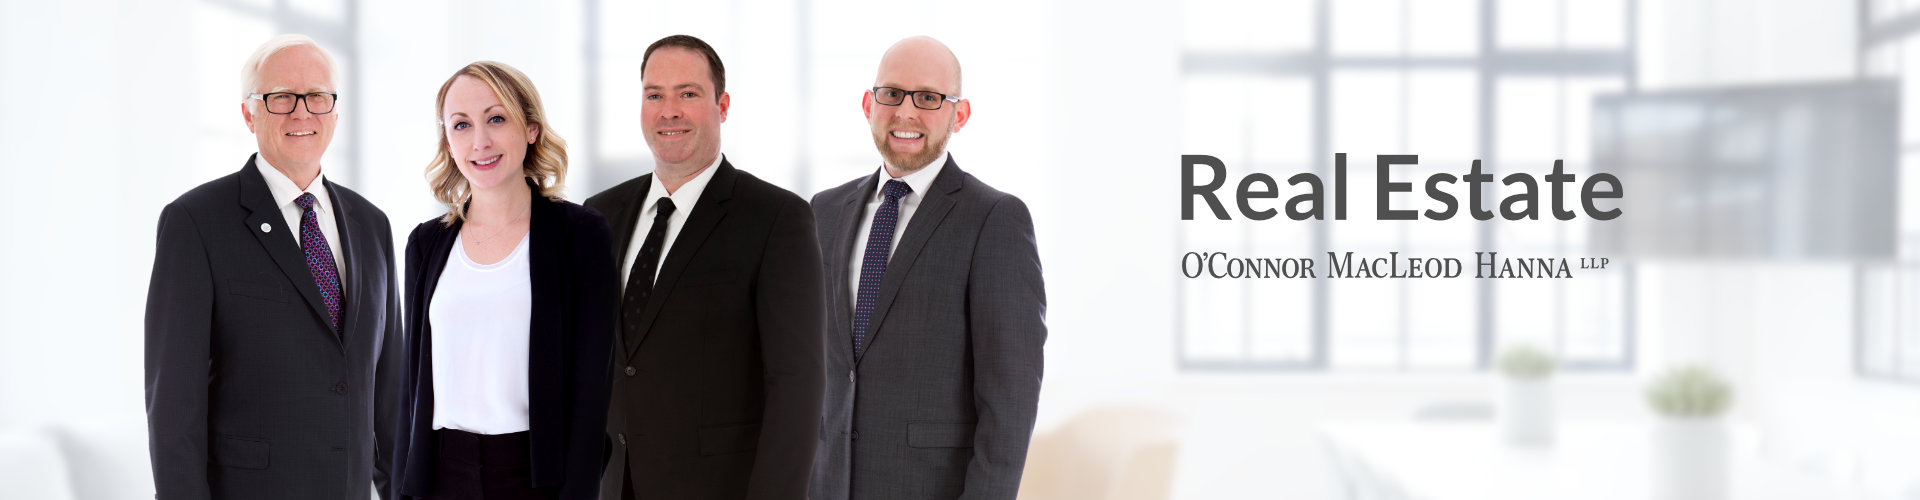 Real Estate Group Lawyers